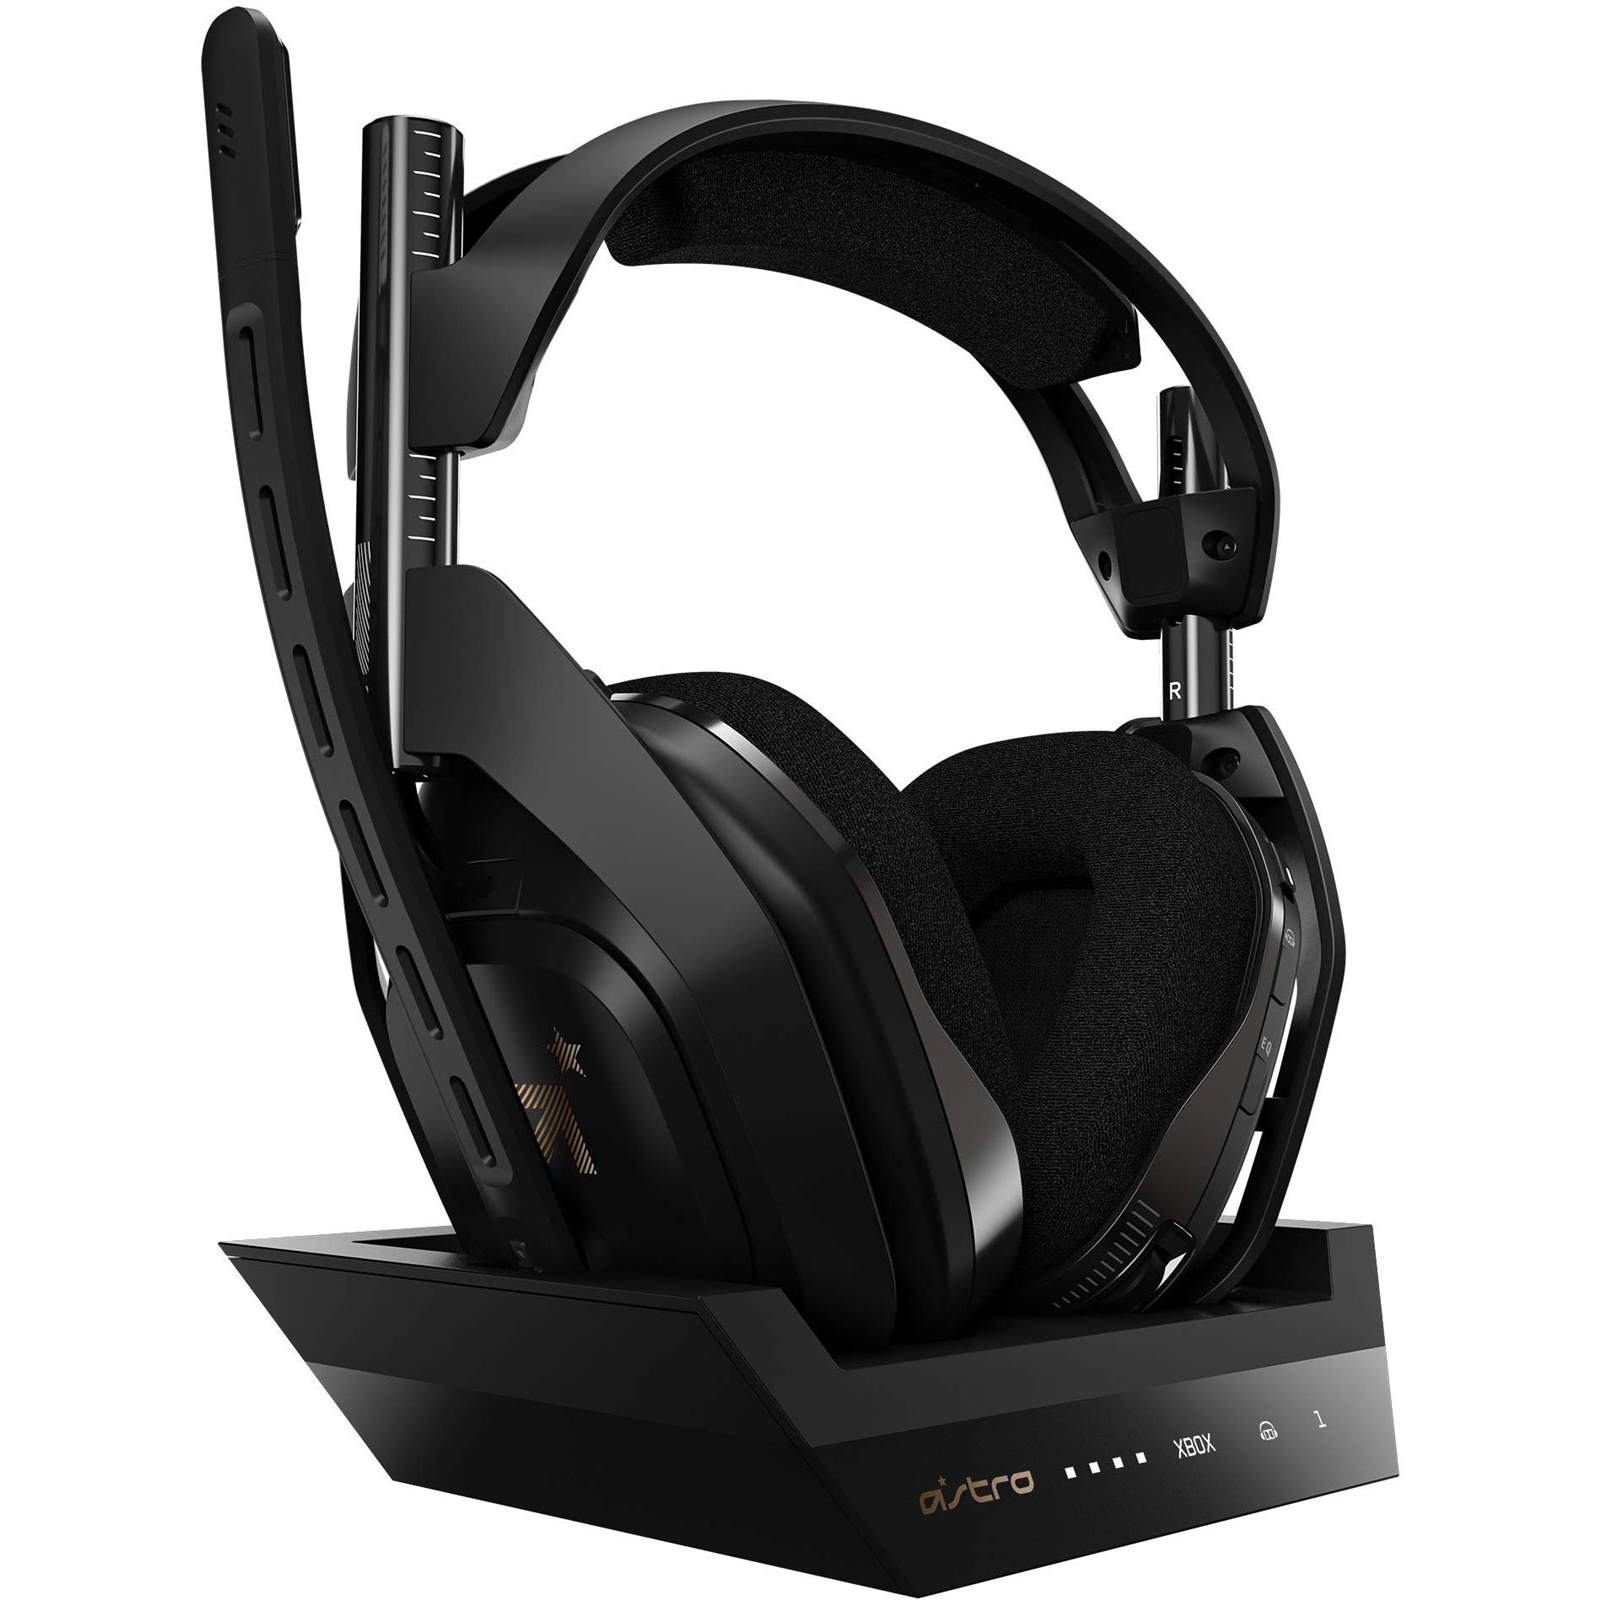 Billy Goat Onderhoud Vrouw Buy the Astro A50 Wireless Gaming Headset for Xbox One, PC & Mac Discord...  ( 939-001680 ) online - PBTech.com/pacific